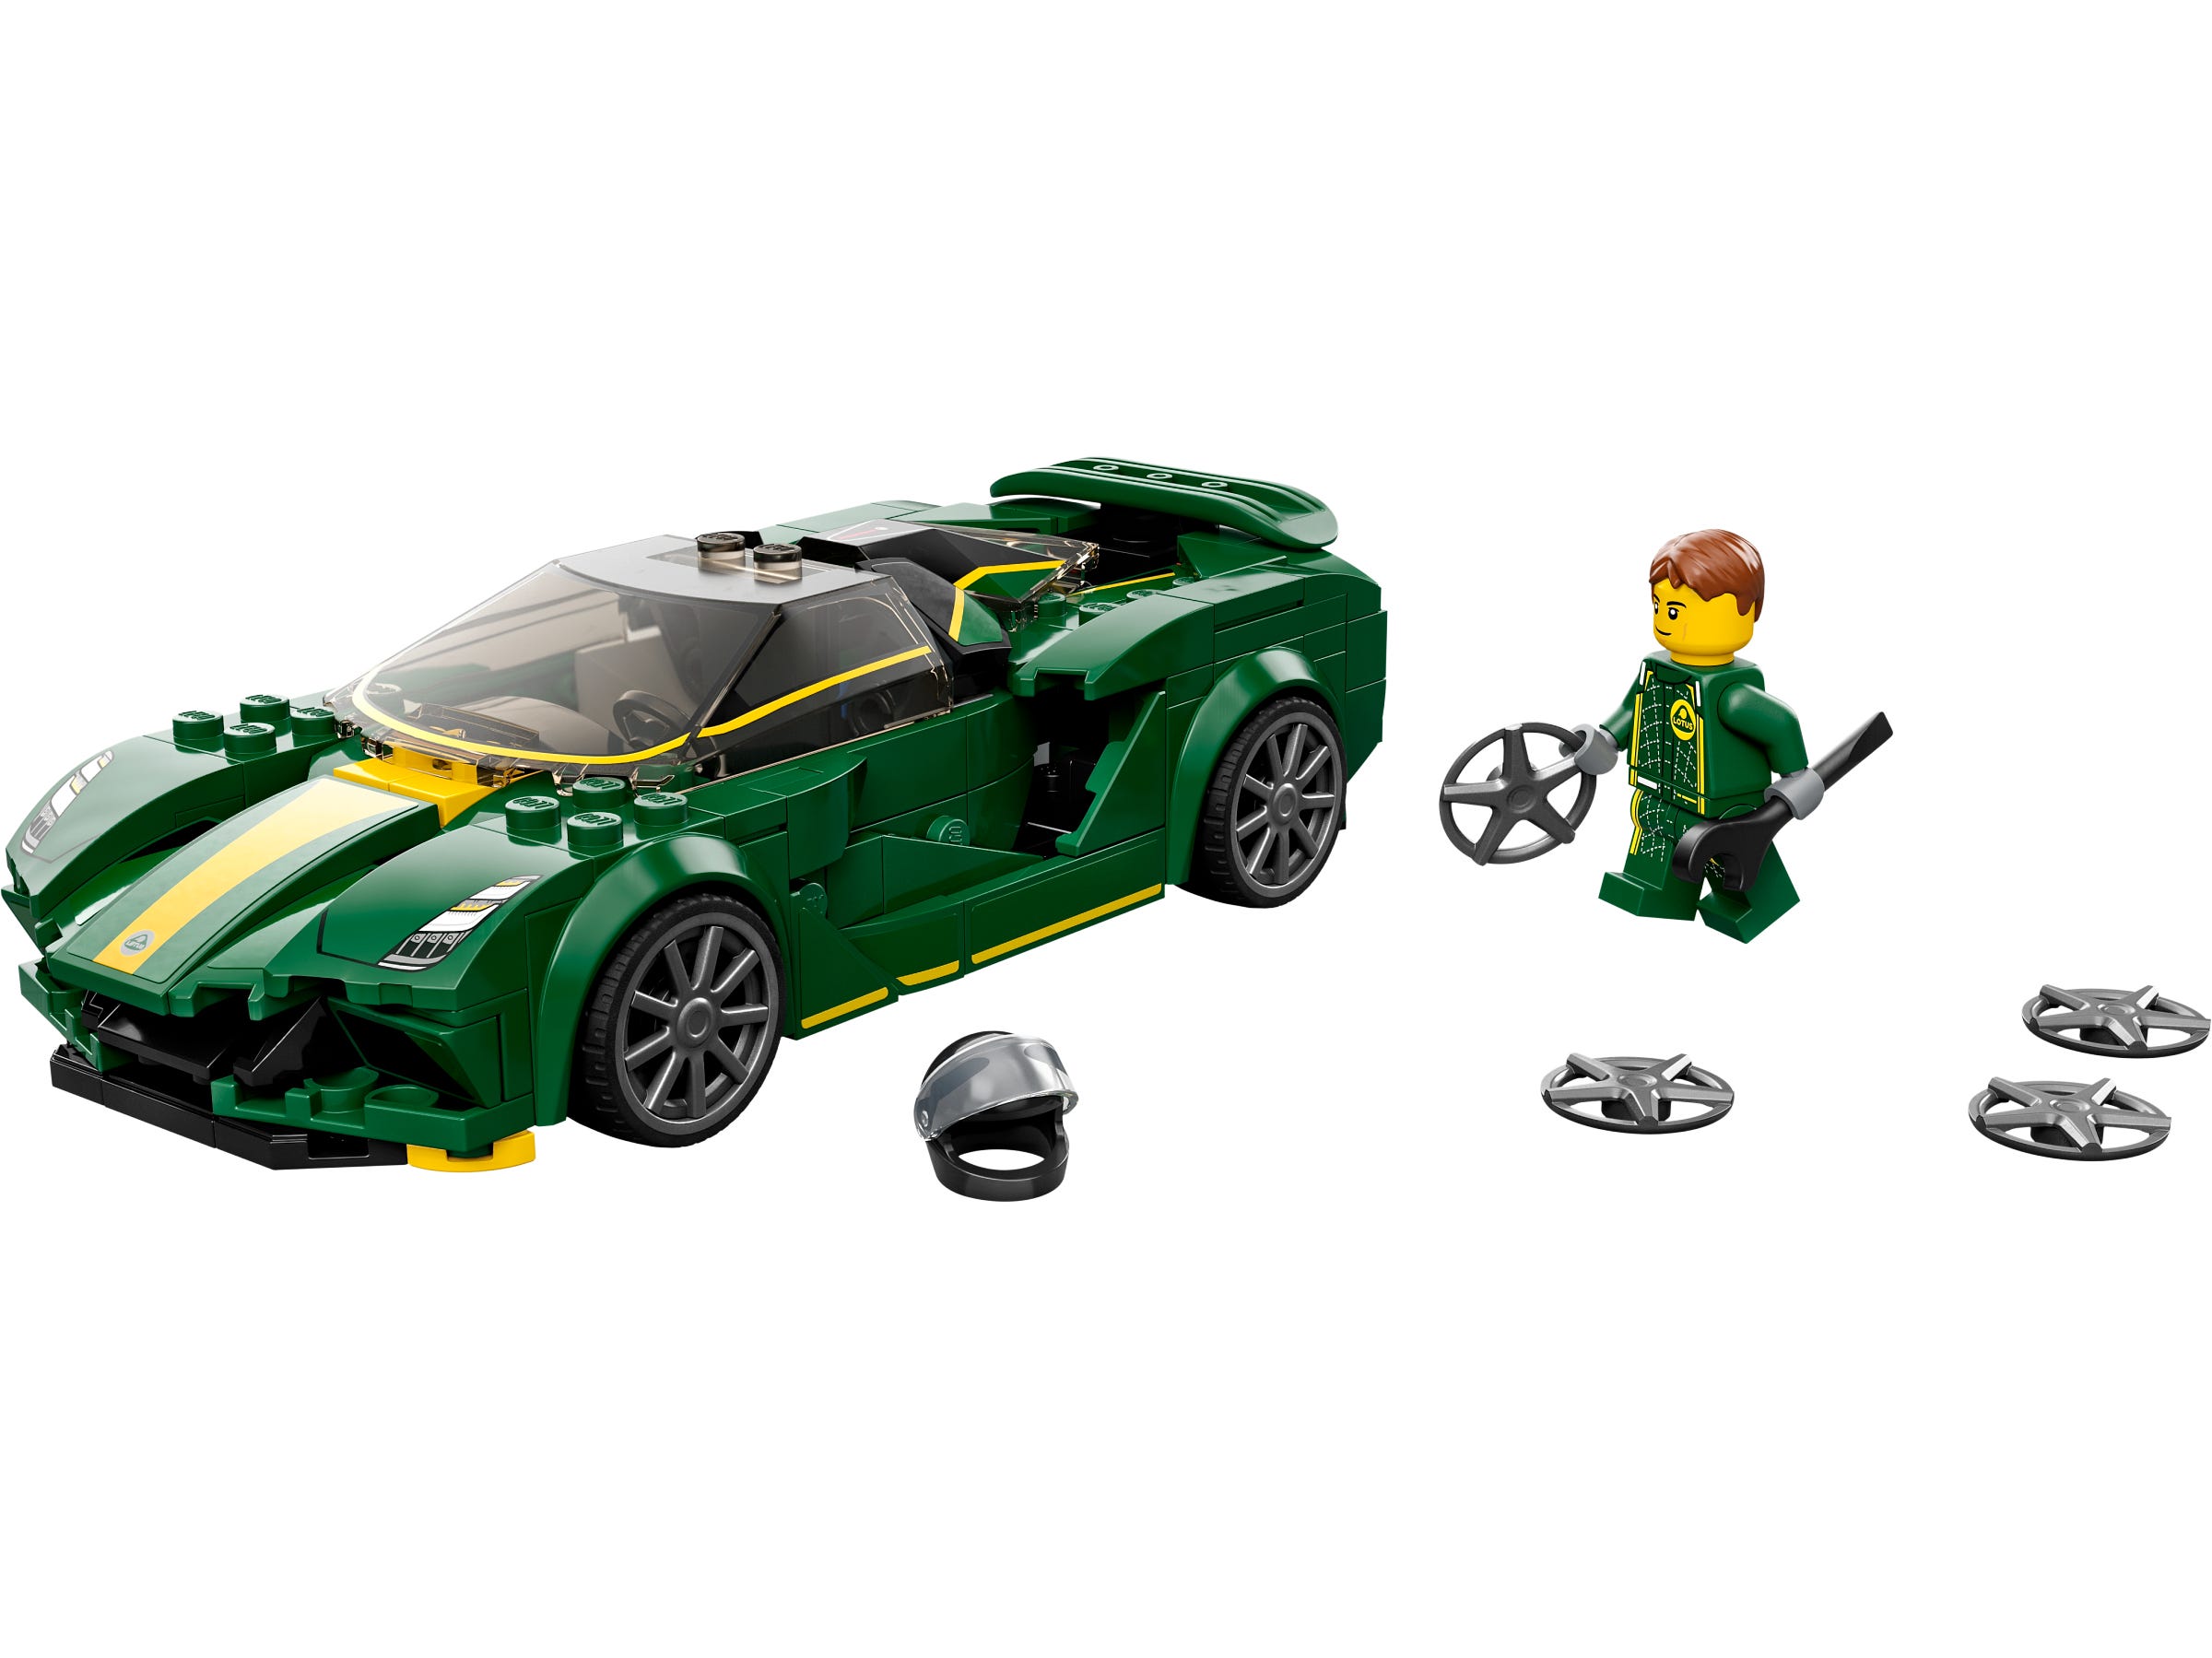 LEGO Speed Champions retiring in 2023 and beyond January